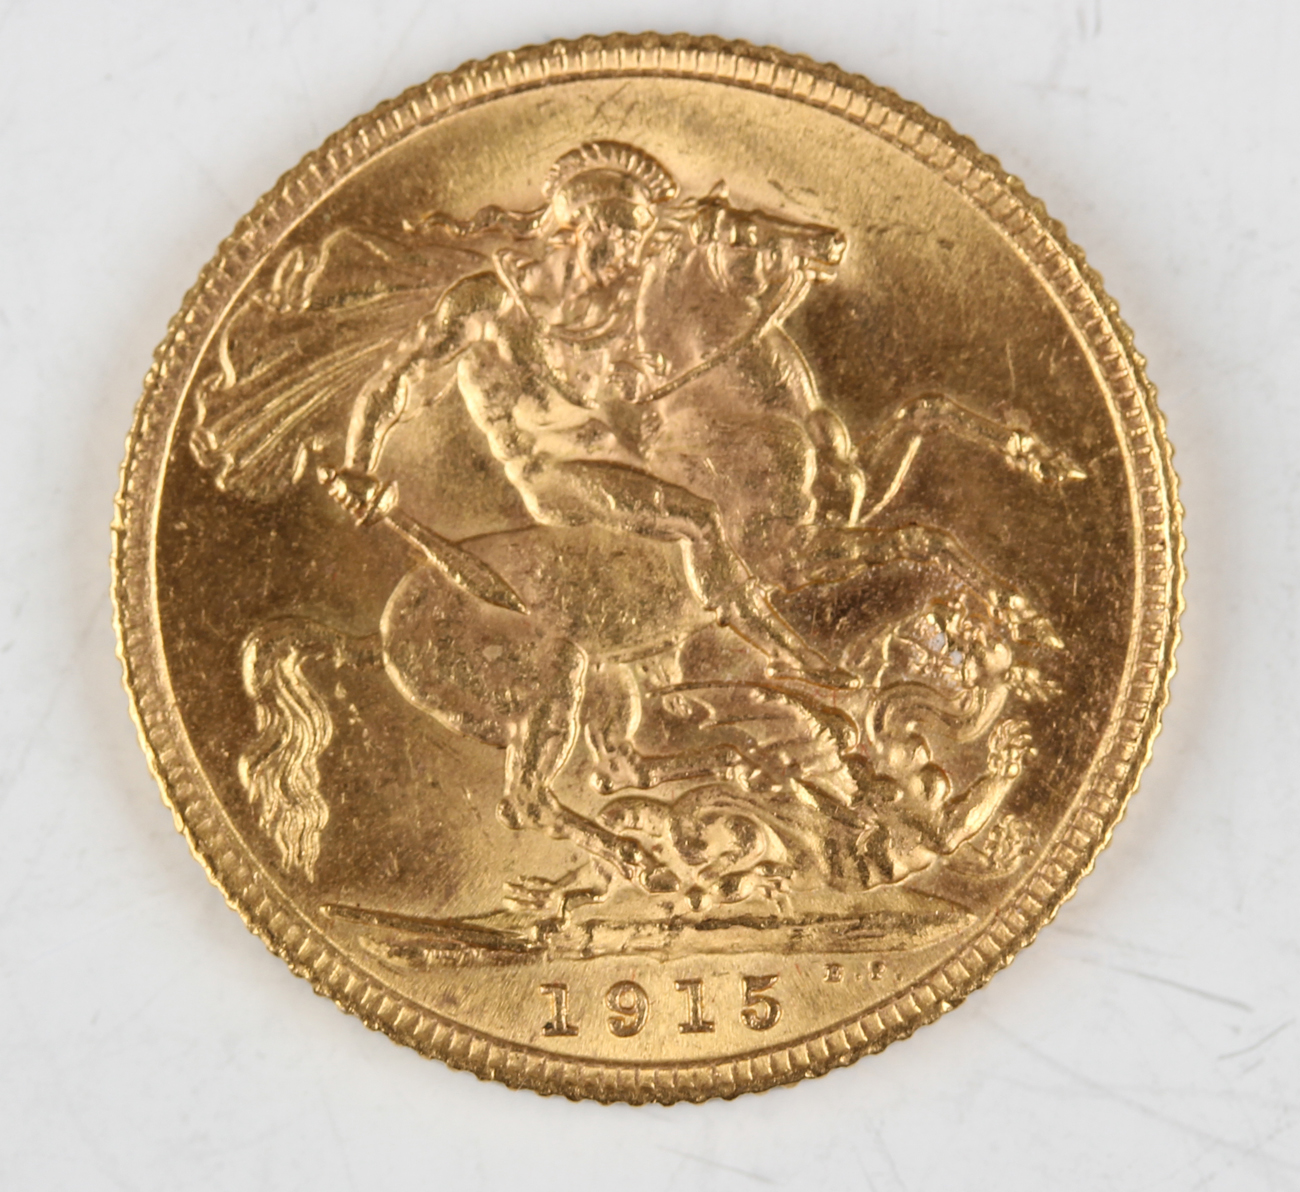 A George V sovereign 1915.Buyer’s Premium 29.4% (including VAT @ 20%) of the hammer price. Lots - Image 2 of 2